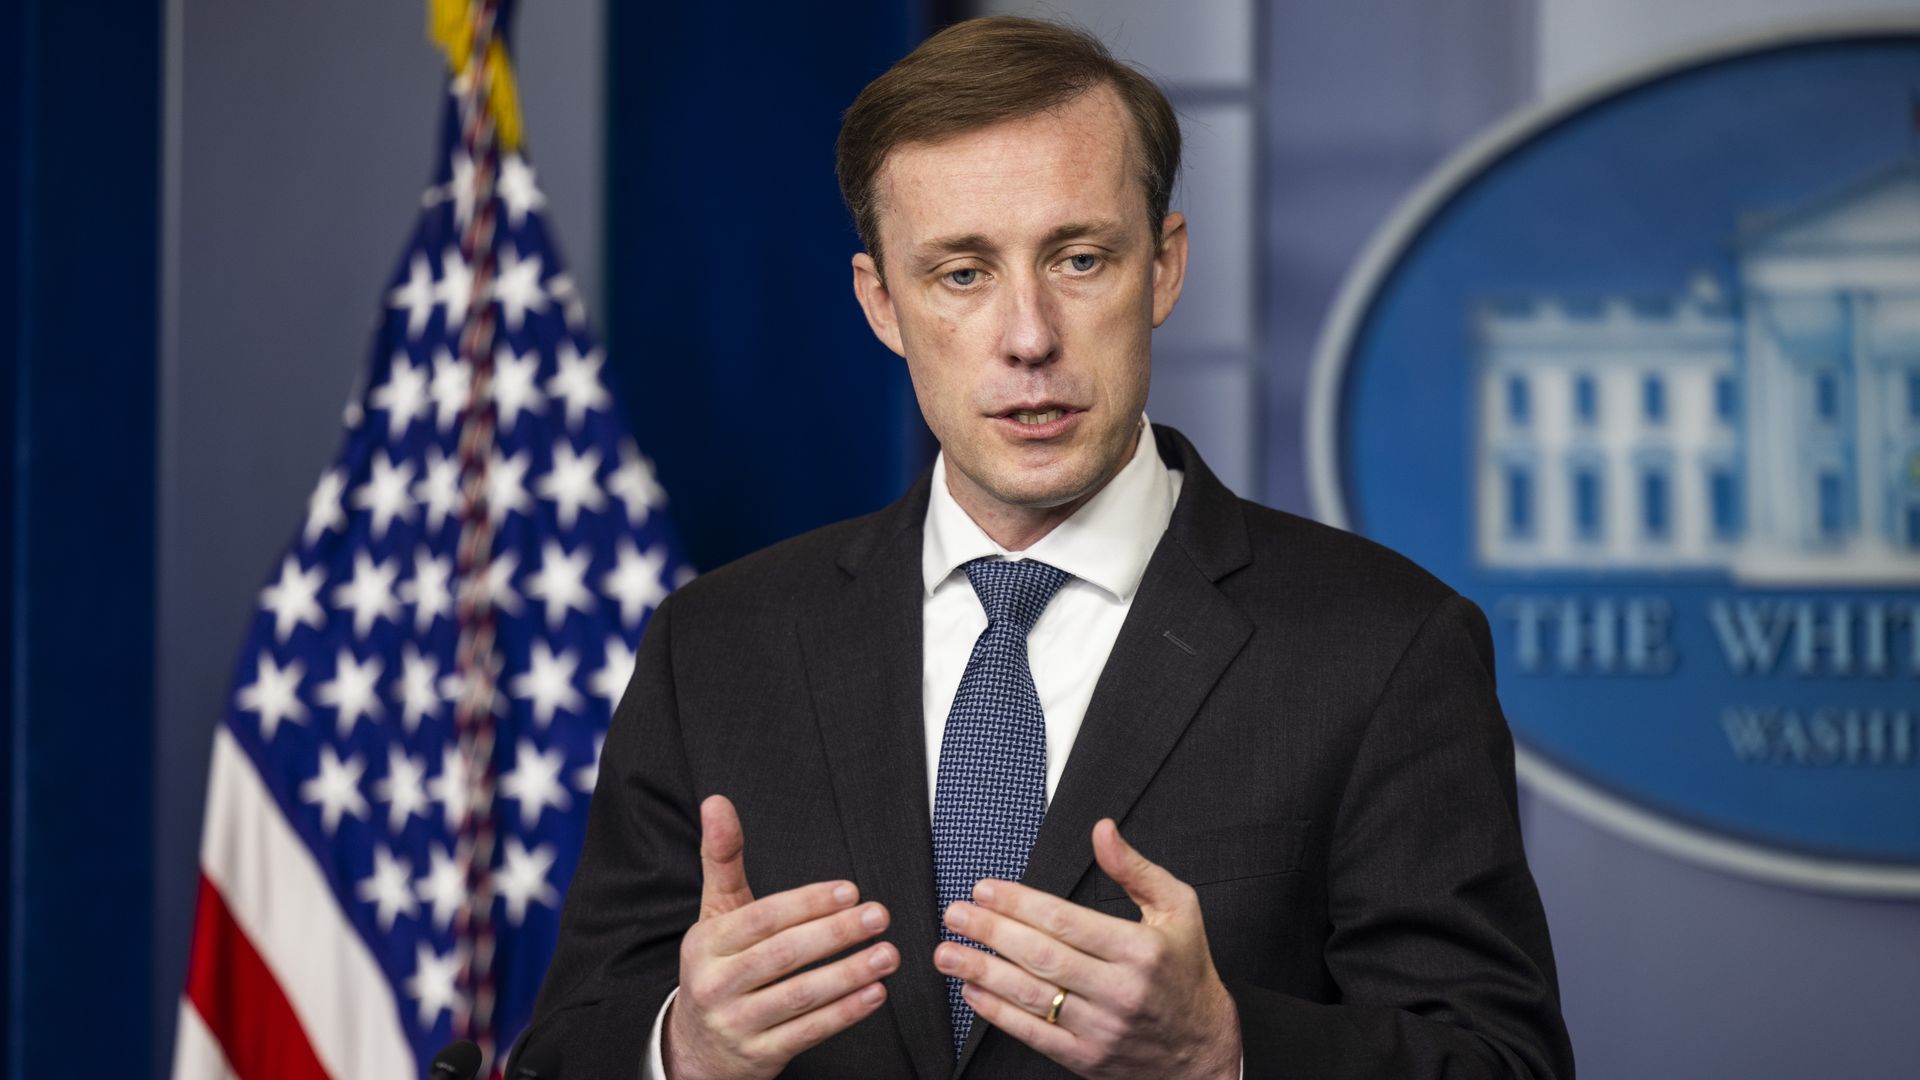 National security adviser Jake Sullivan is seen addressing reporters at the White House.